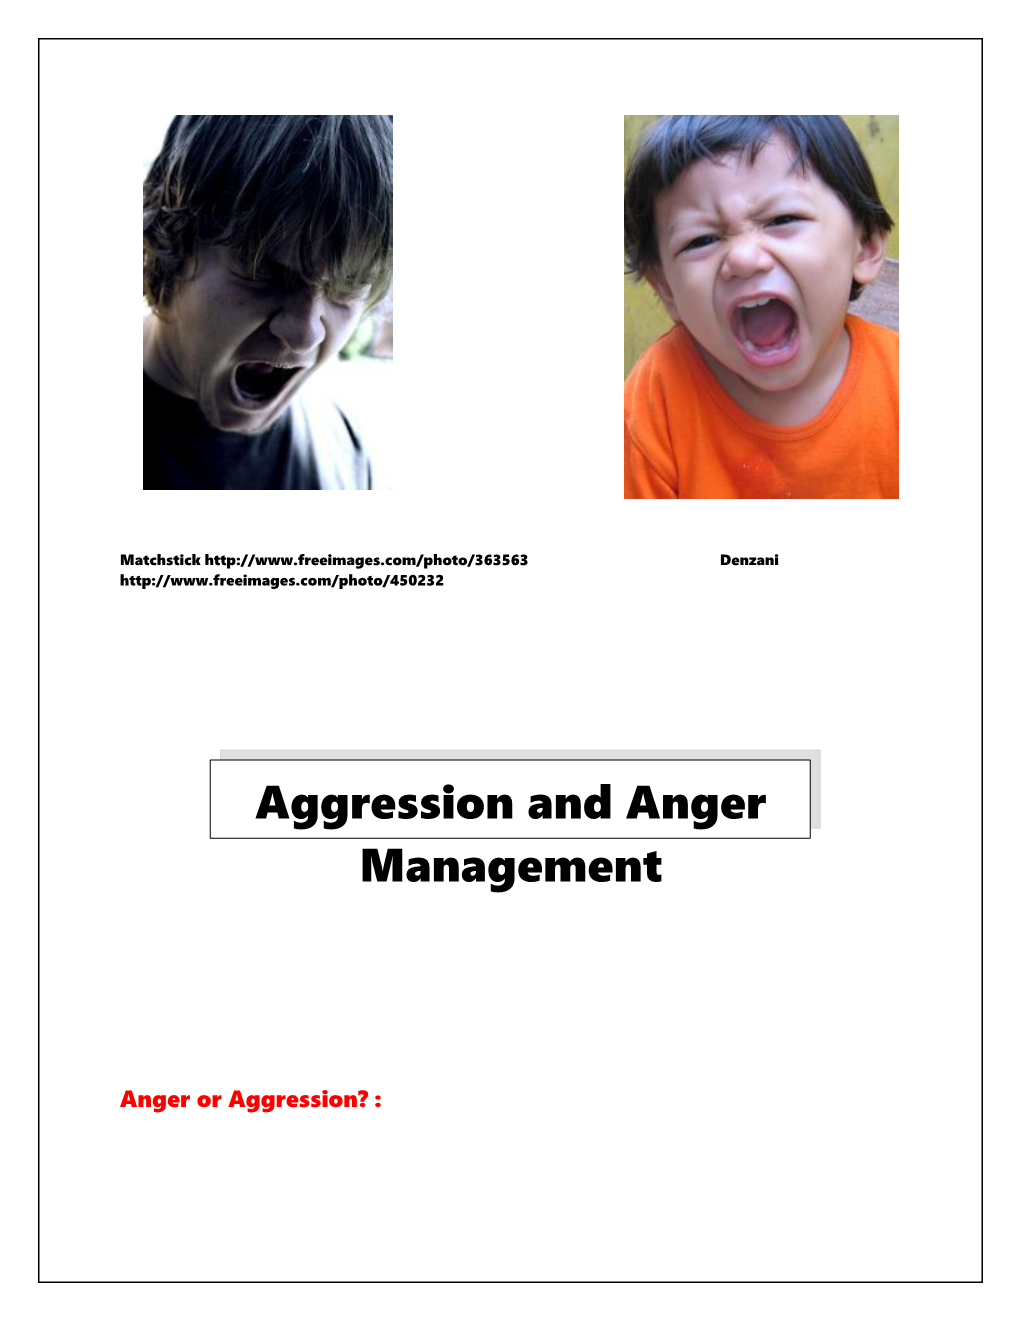 Aggression and Anger Management